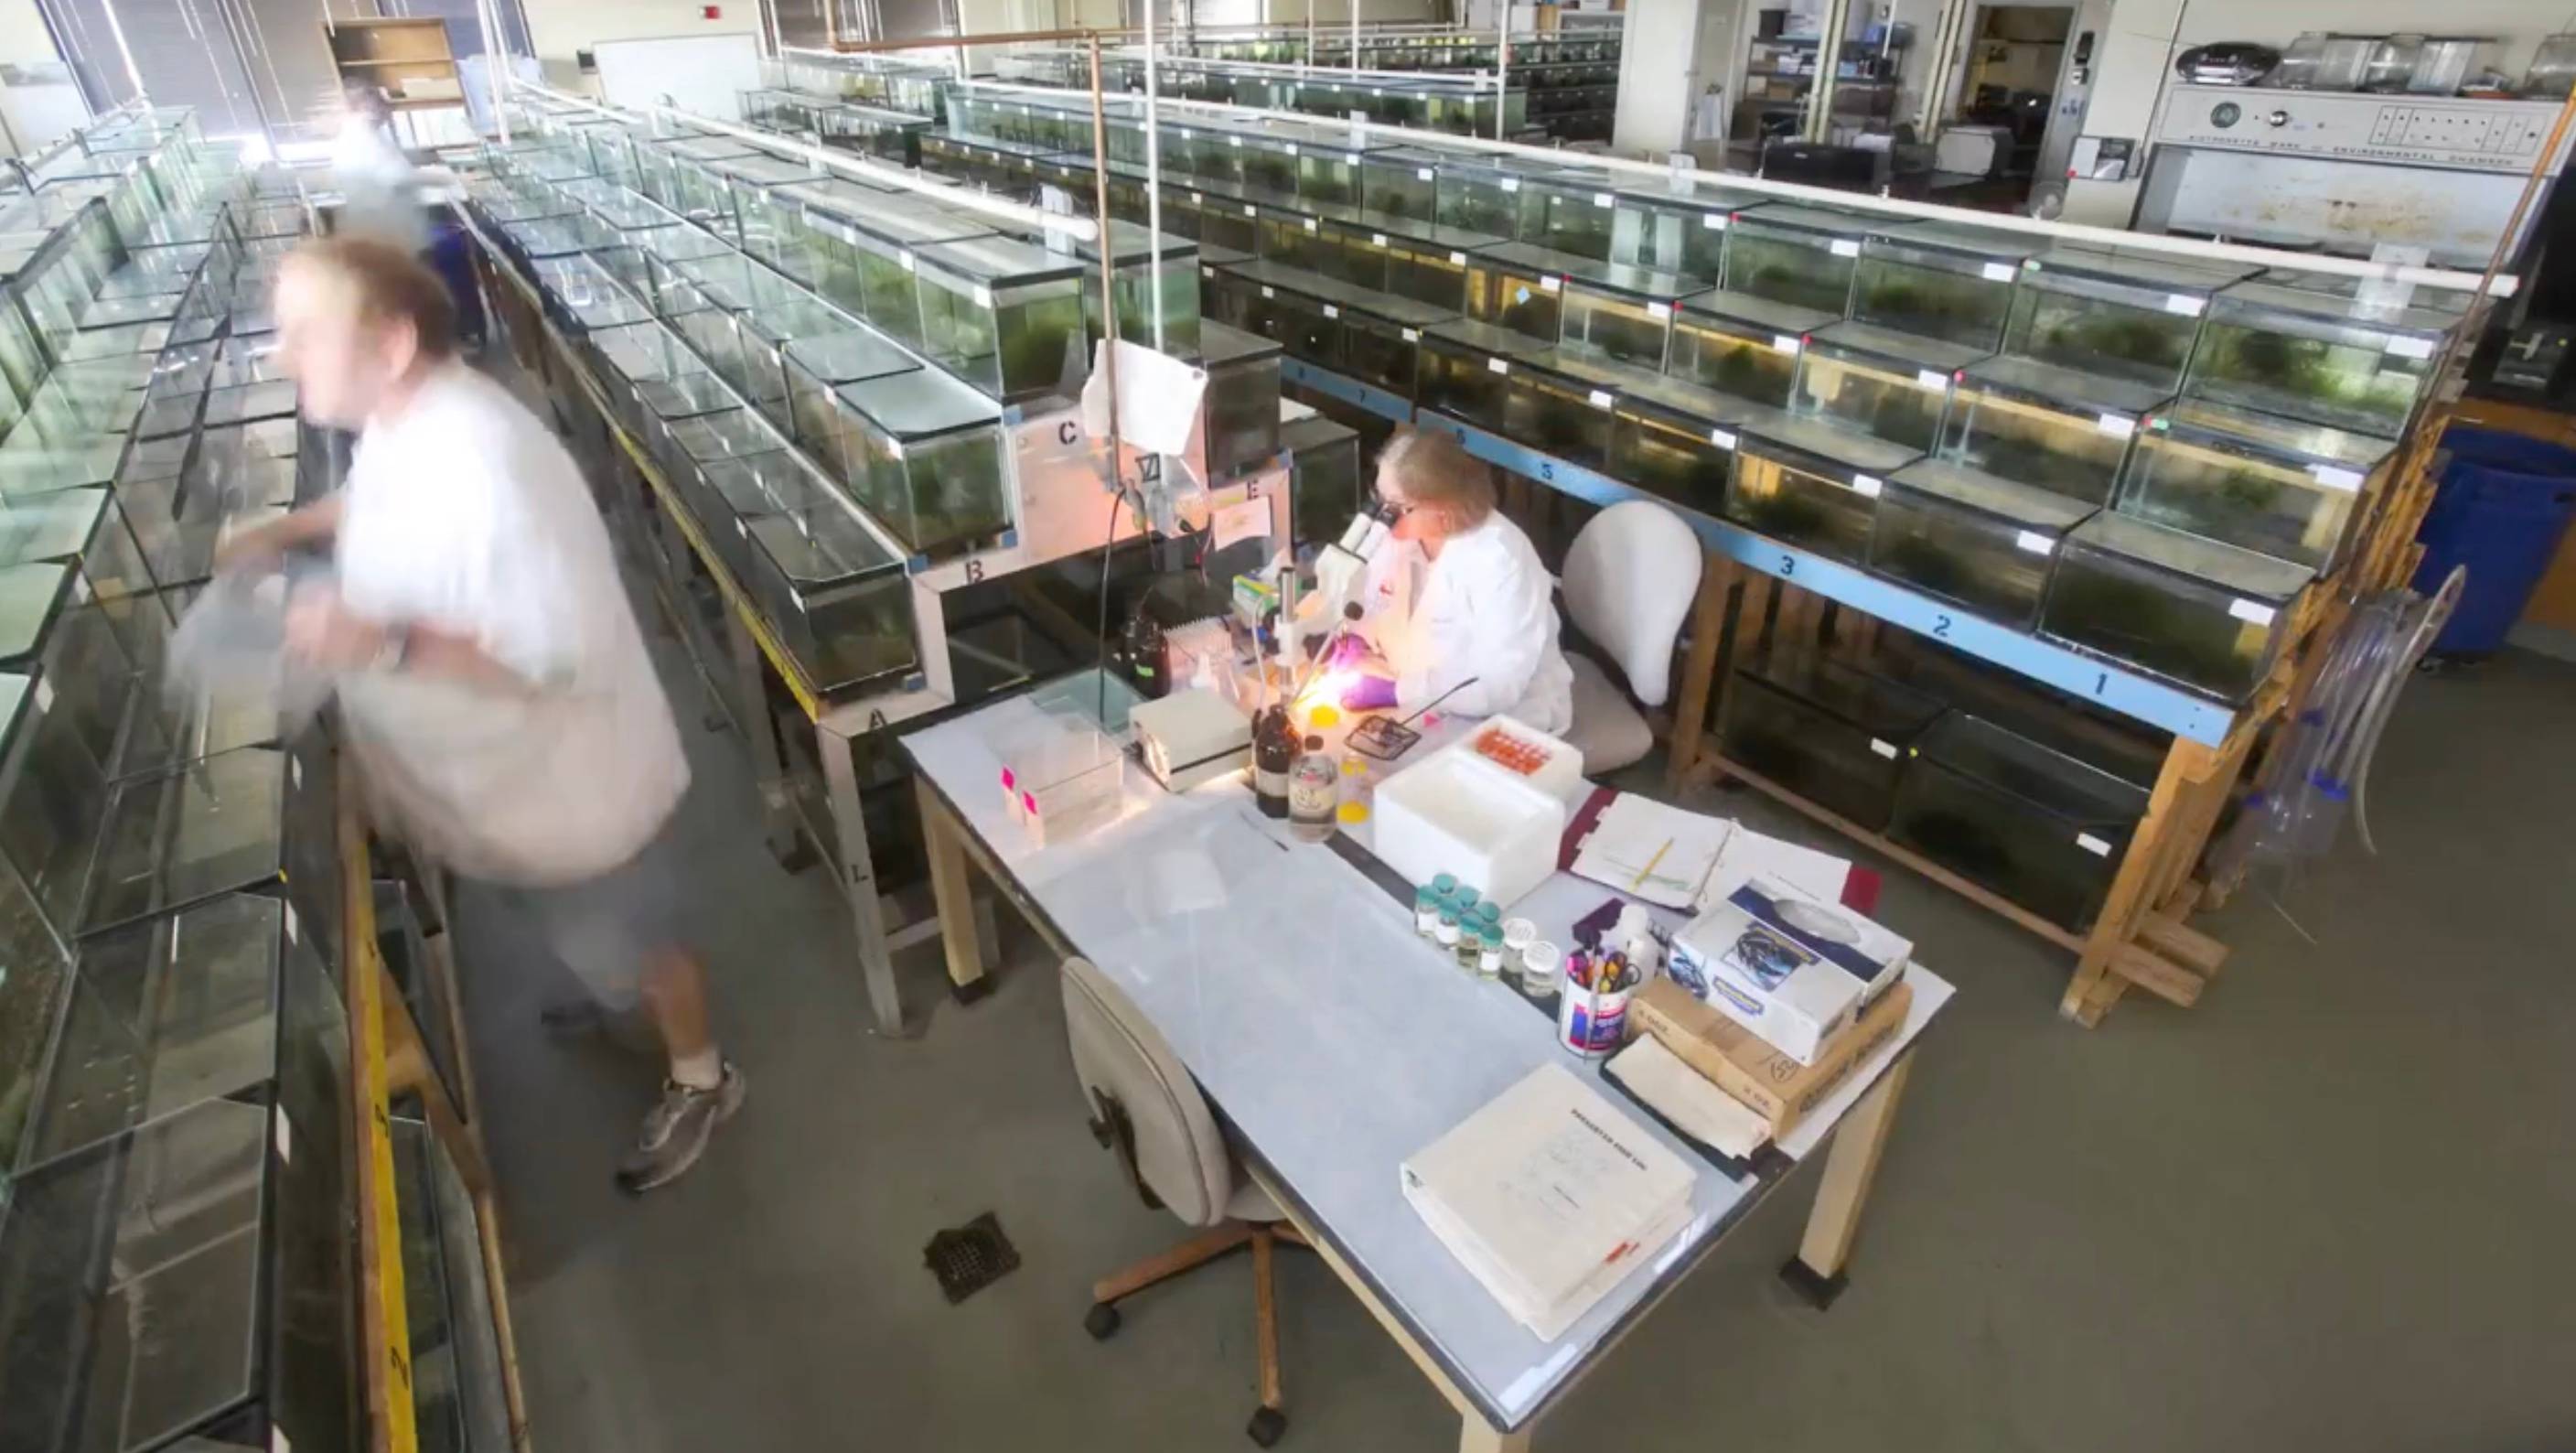 A time-lapse video shows some of the daily activities of the XGSC.